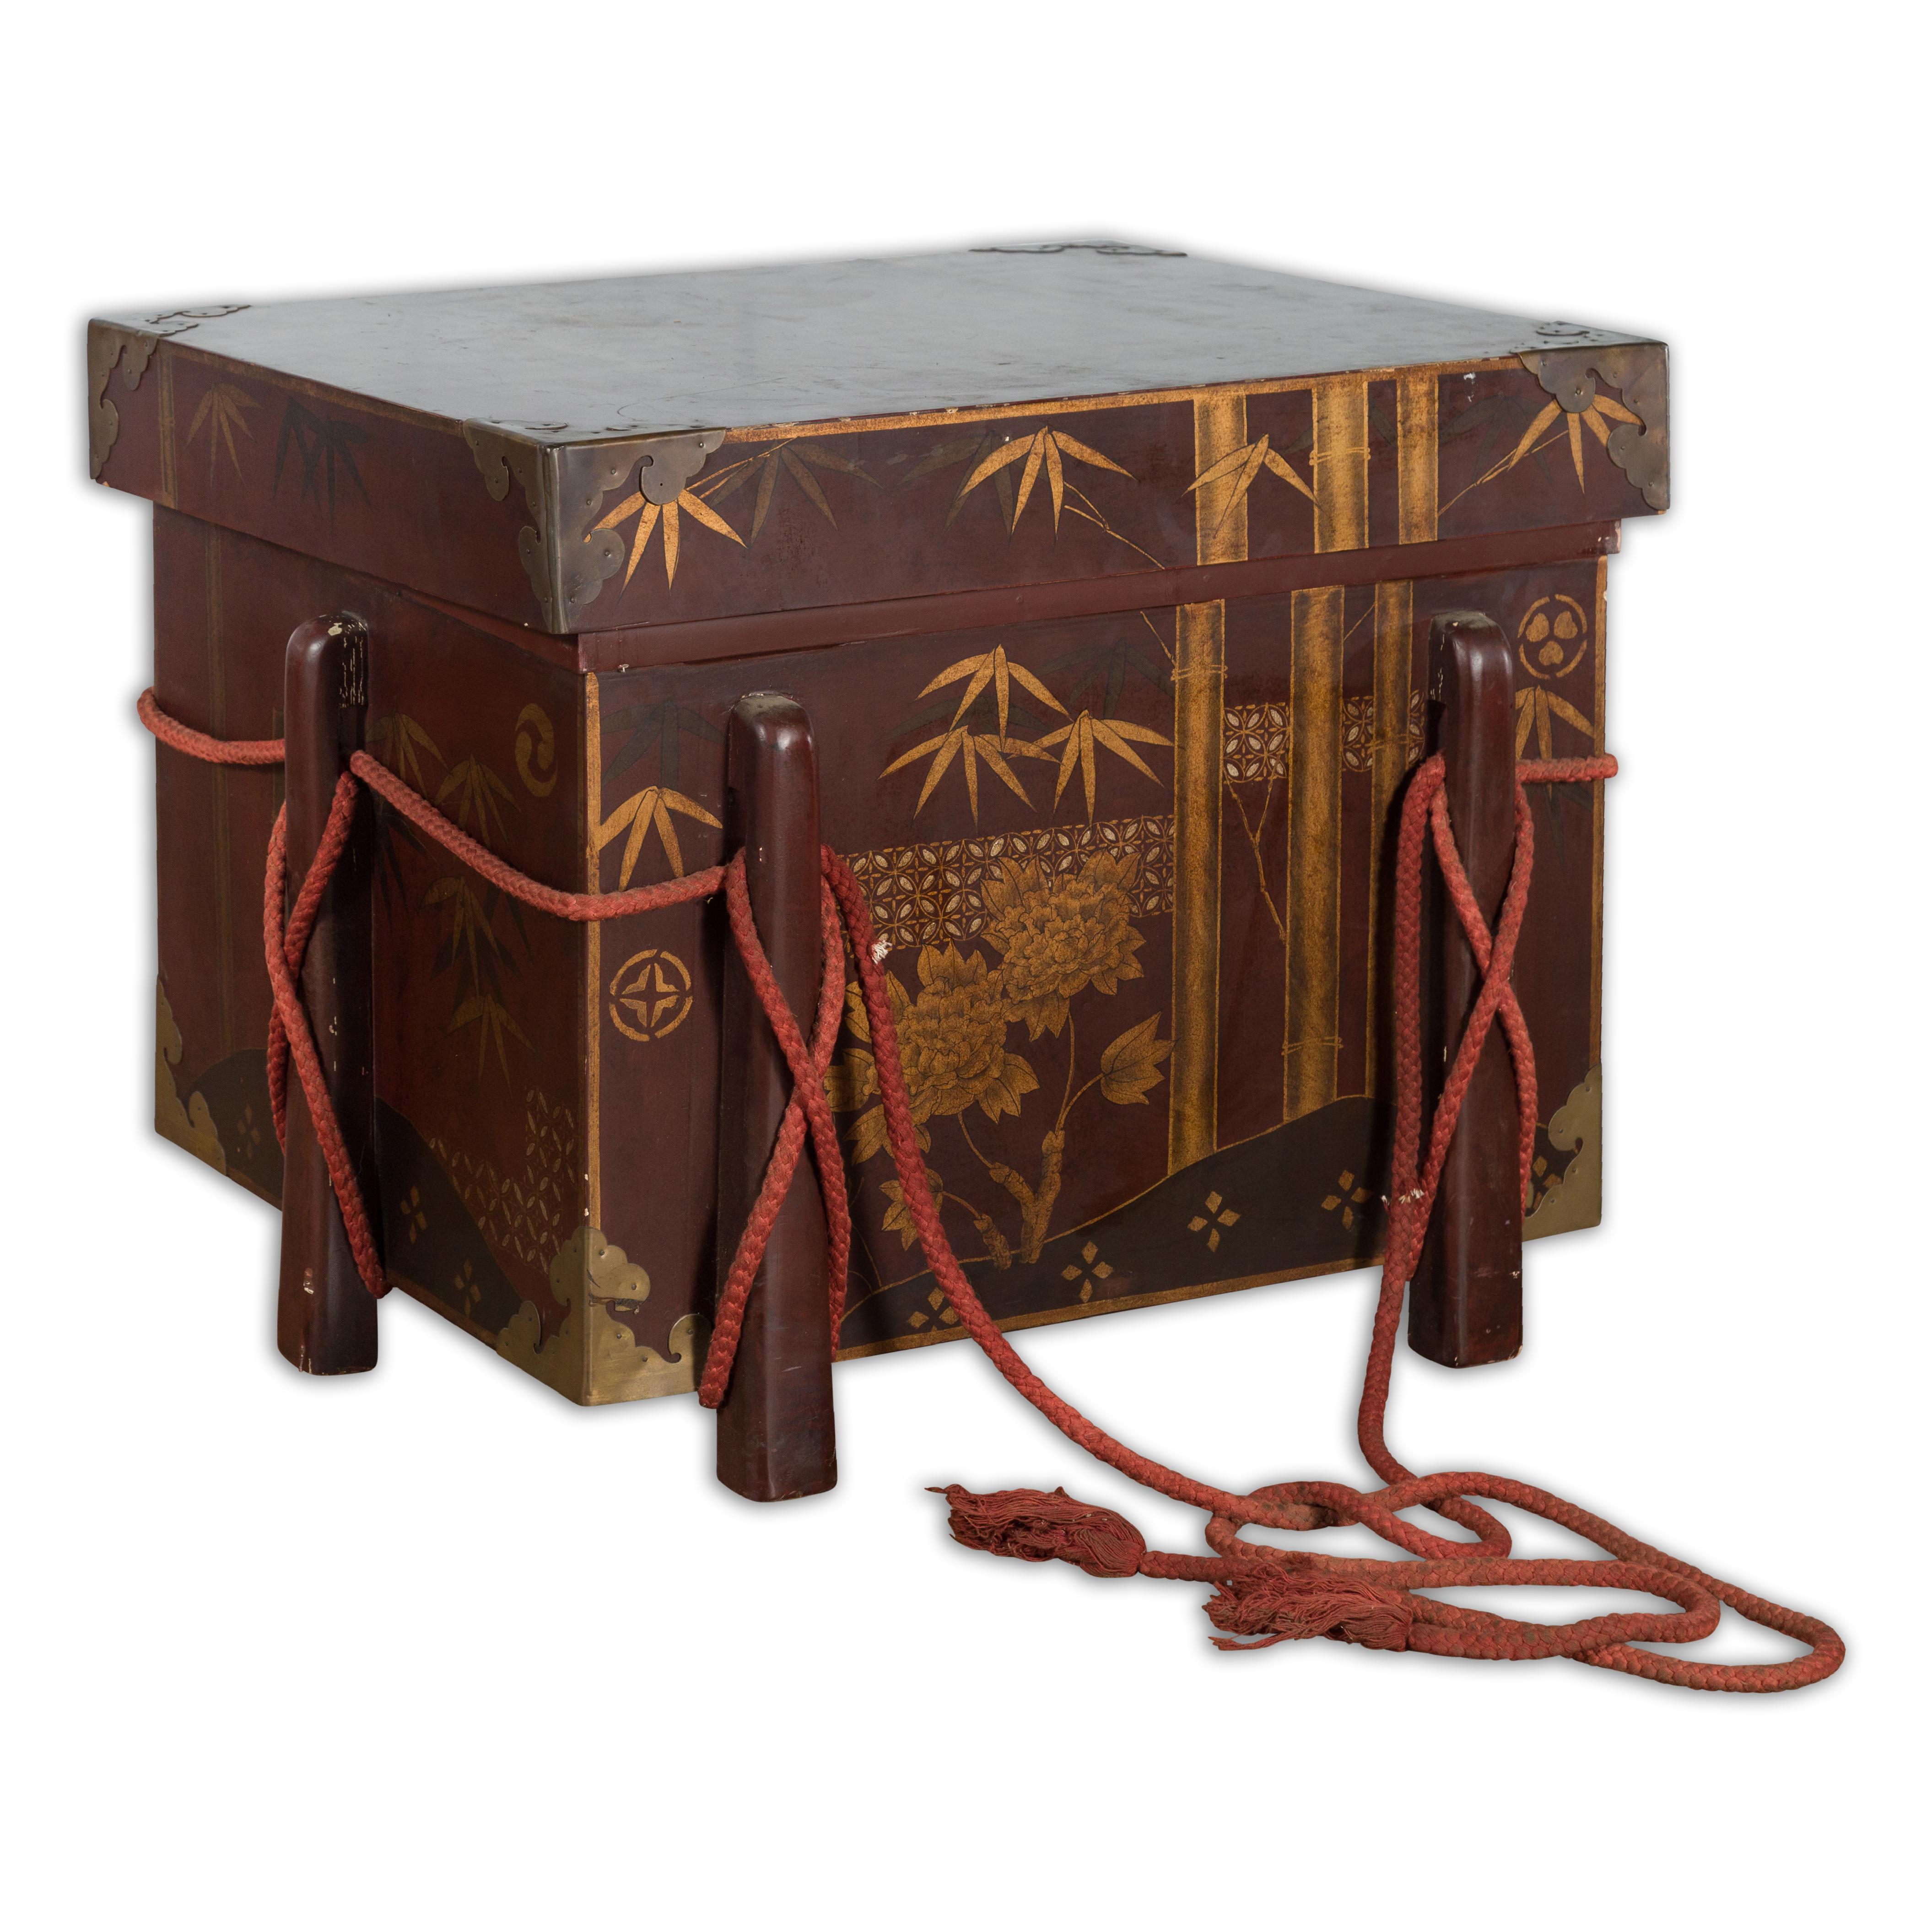 A vintage Japanese reddish brown lacquered wedding chest from the mid 20th century, with hand-painted foliage and floral décor and ropes. Created in Japan during the midcentury period, this vintage wedding box features a reddish brown lacquer